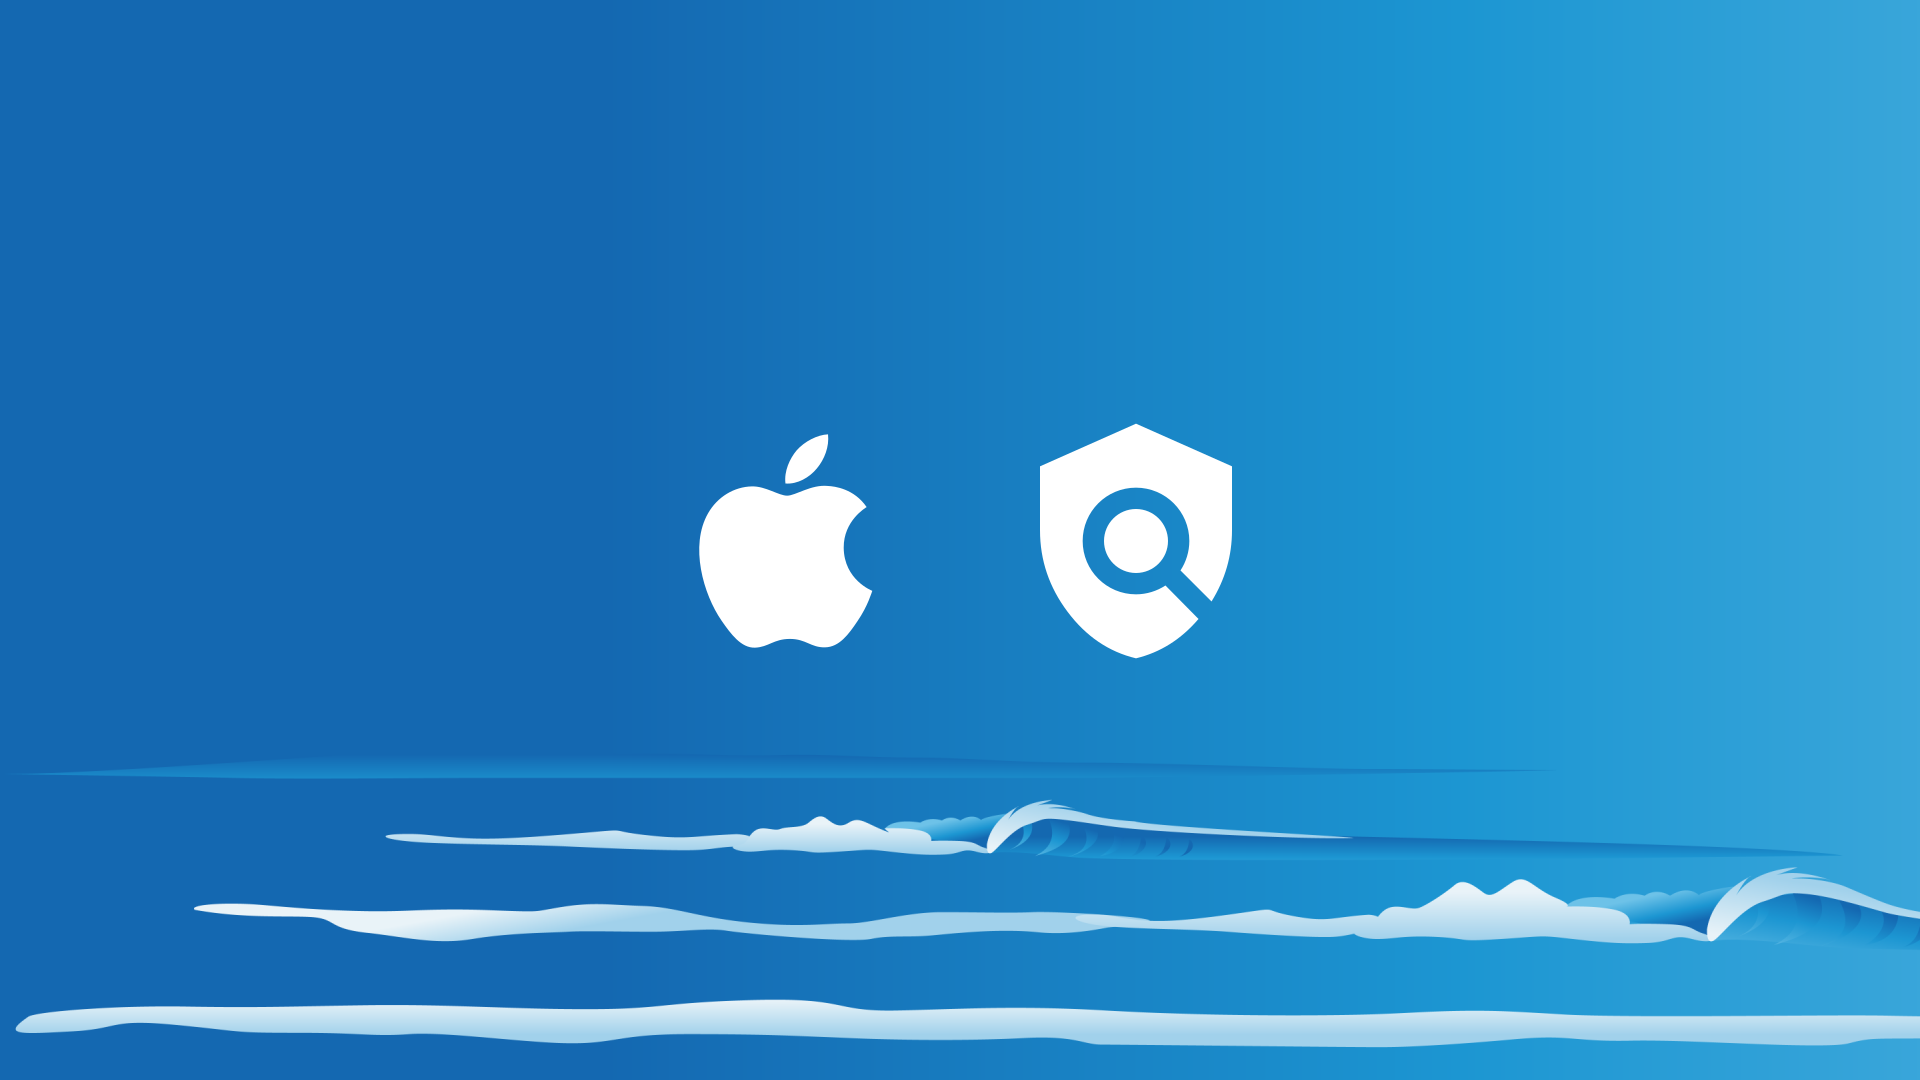 Sea background with Apple logo